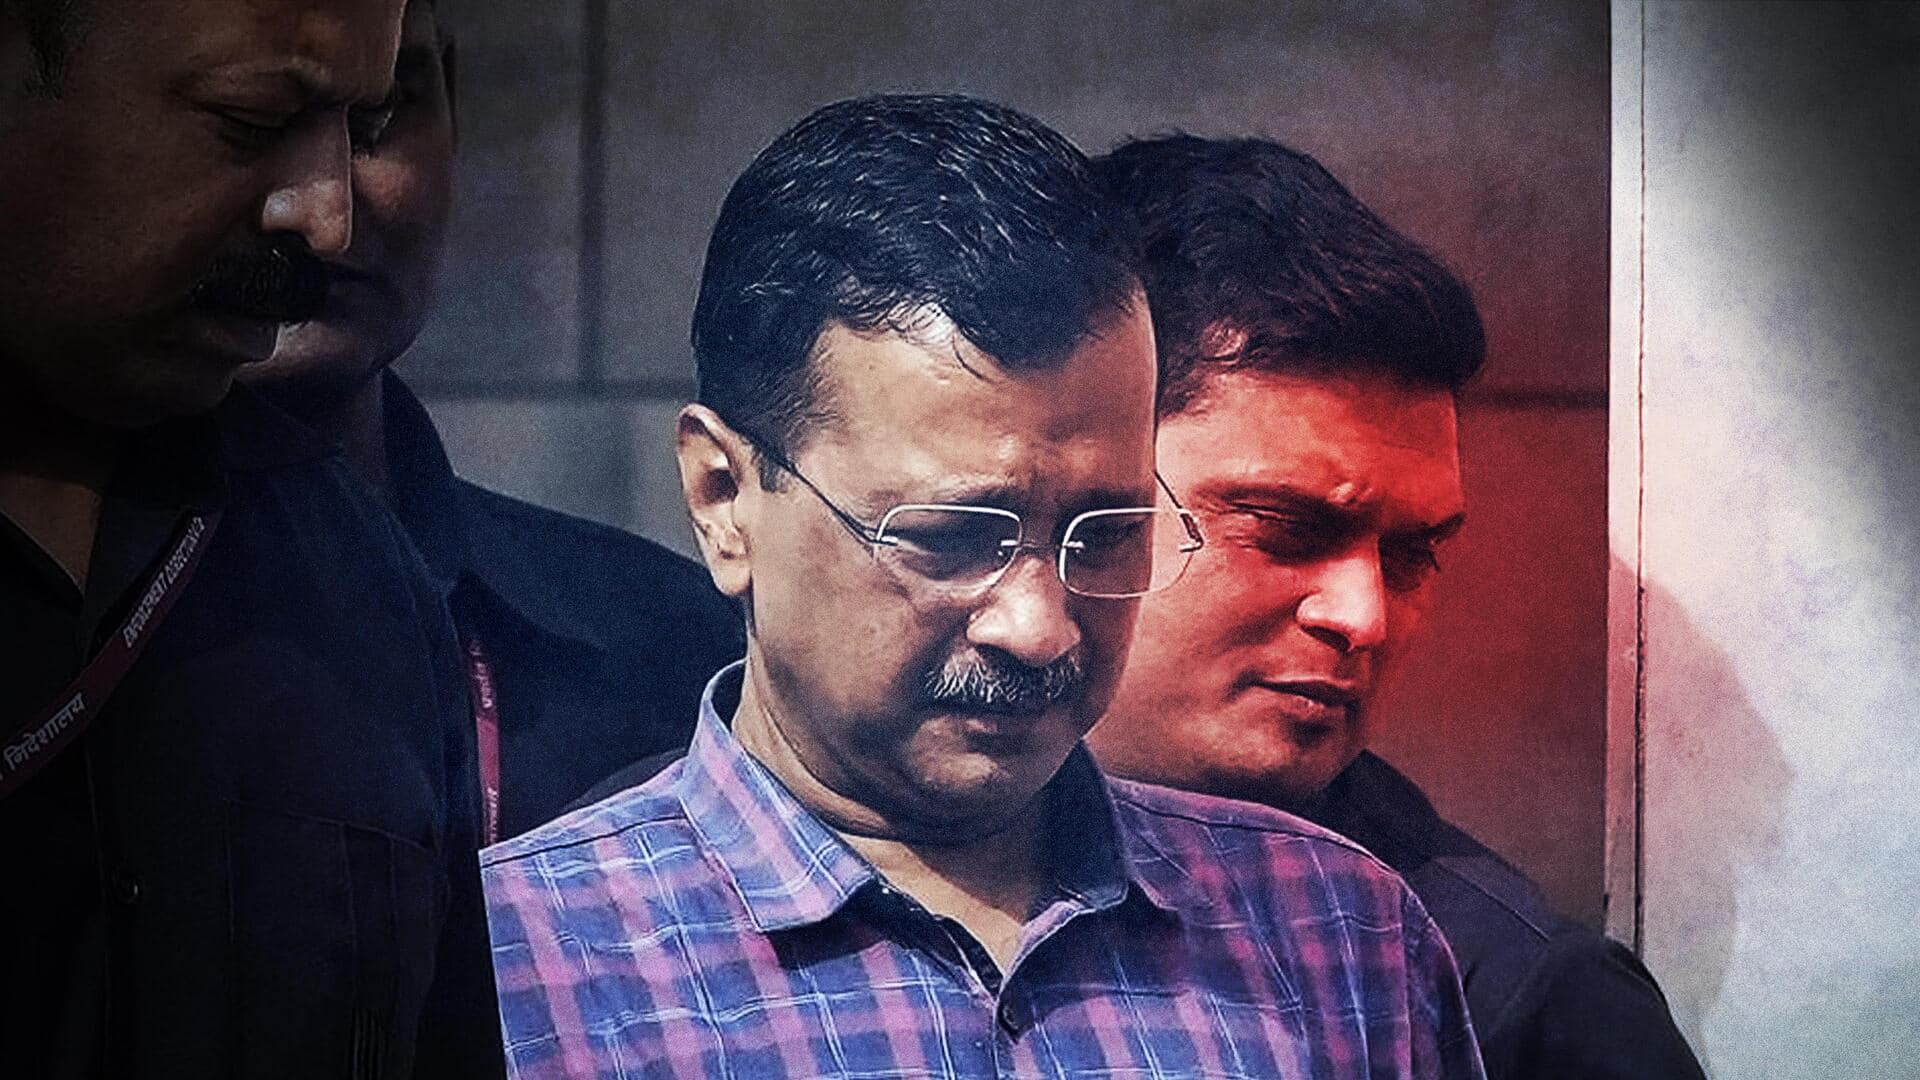 Delhi HC stays Kejriwal's bail, order likely in 2-3 days